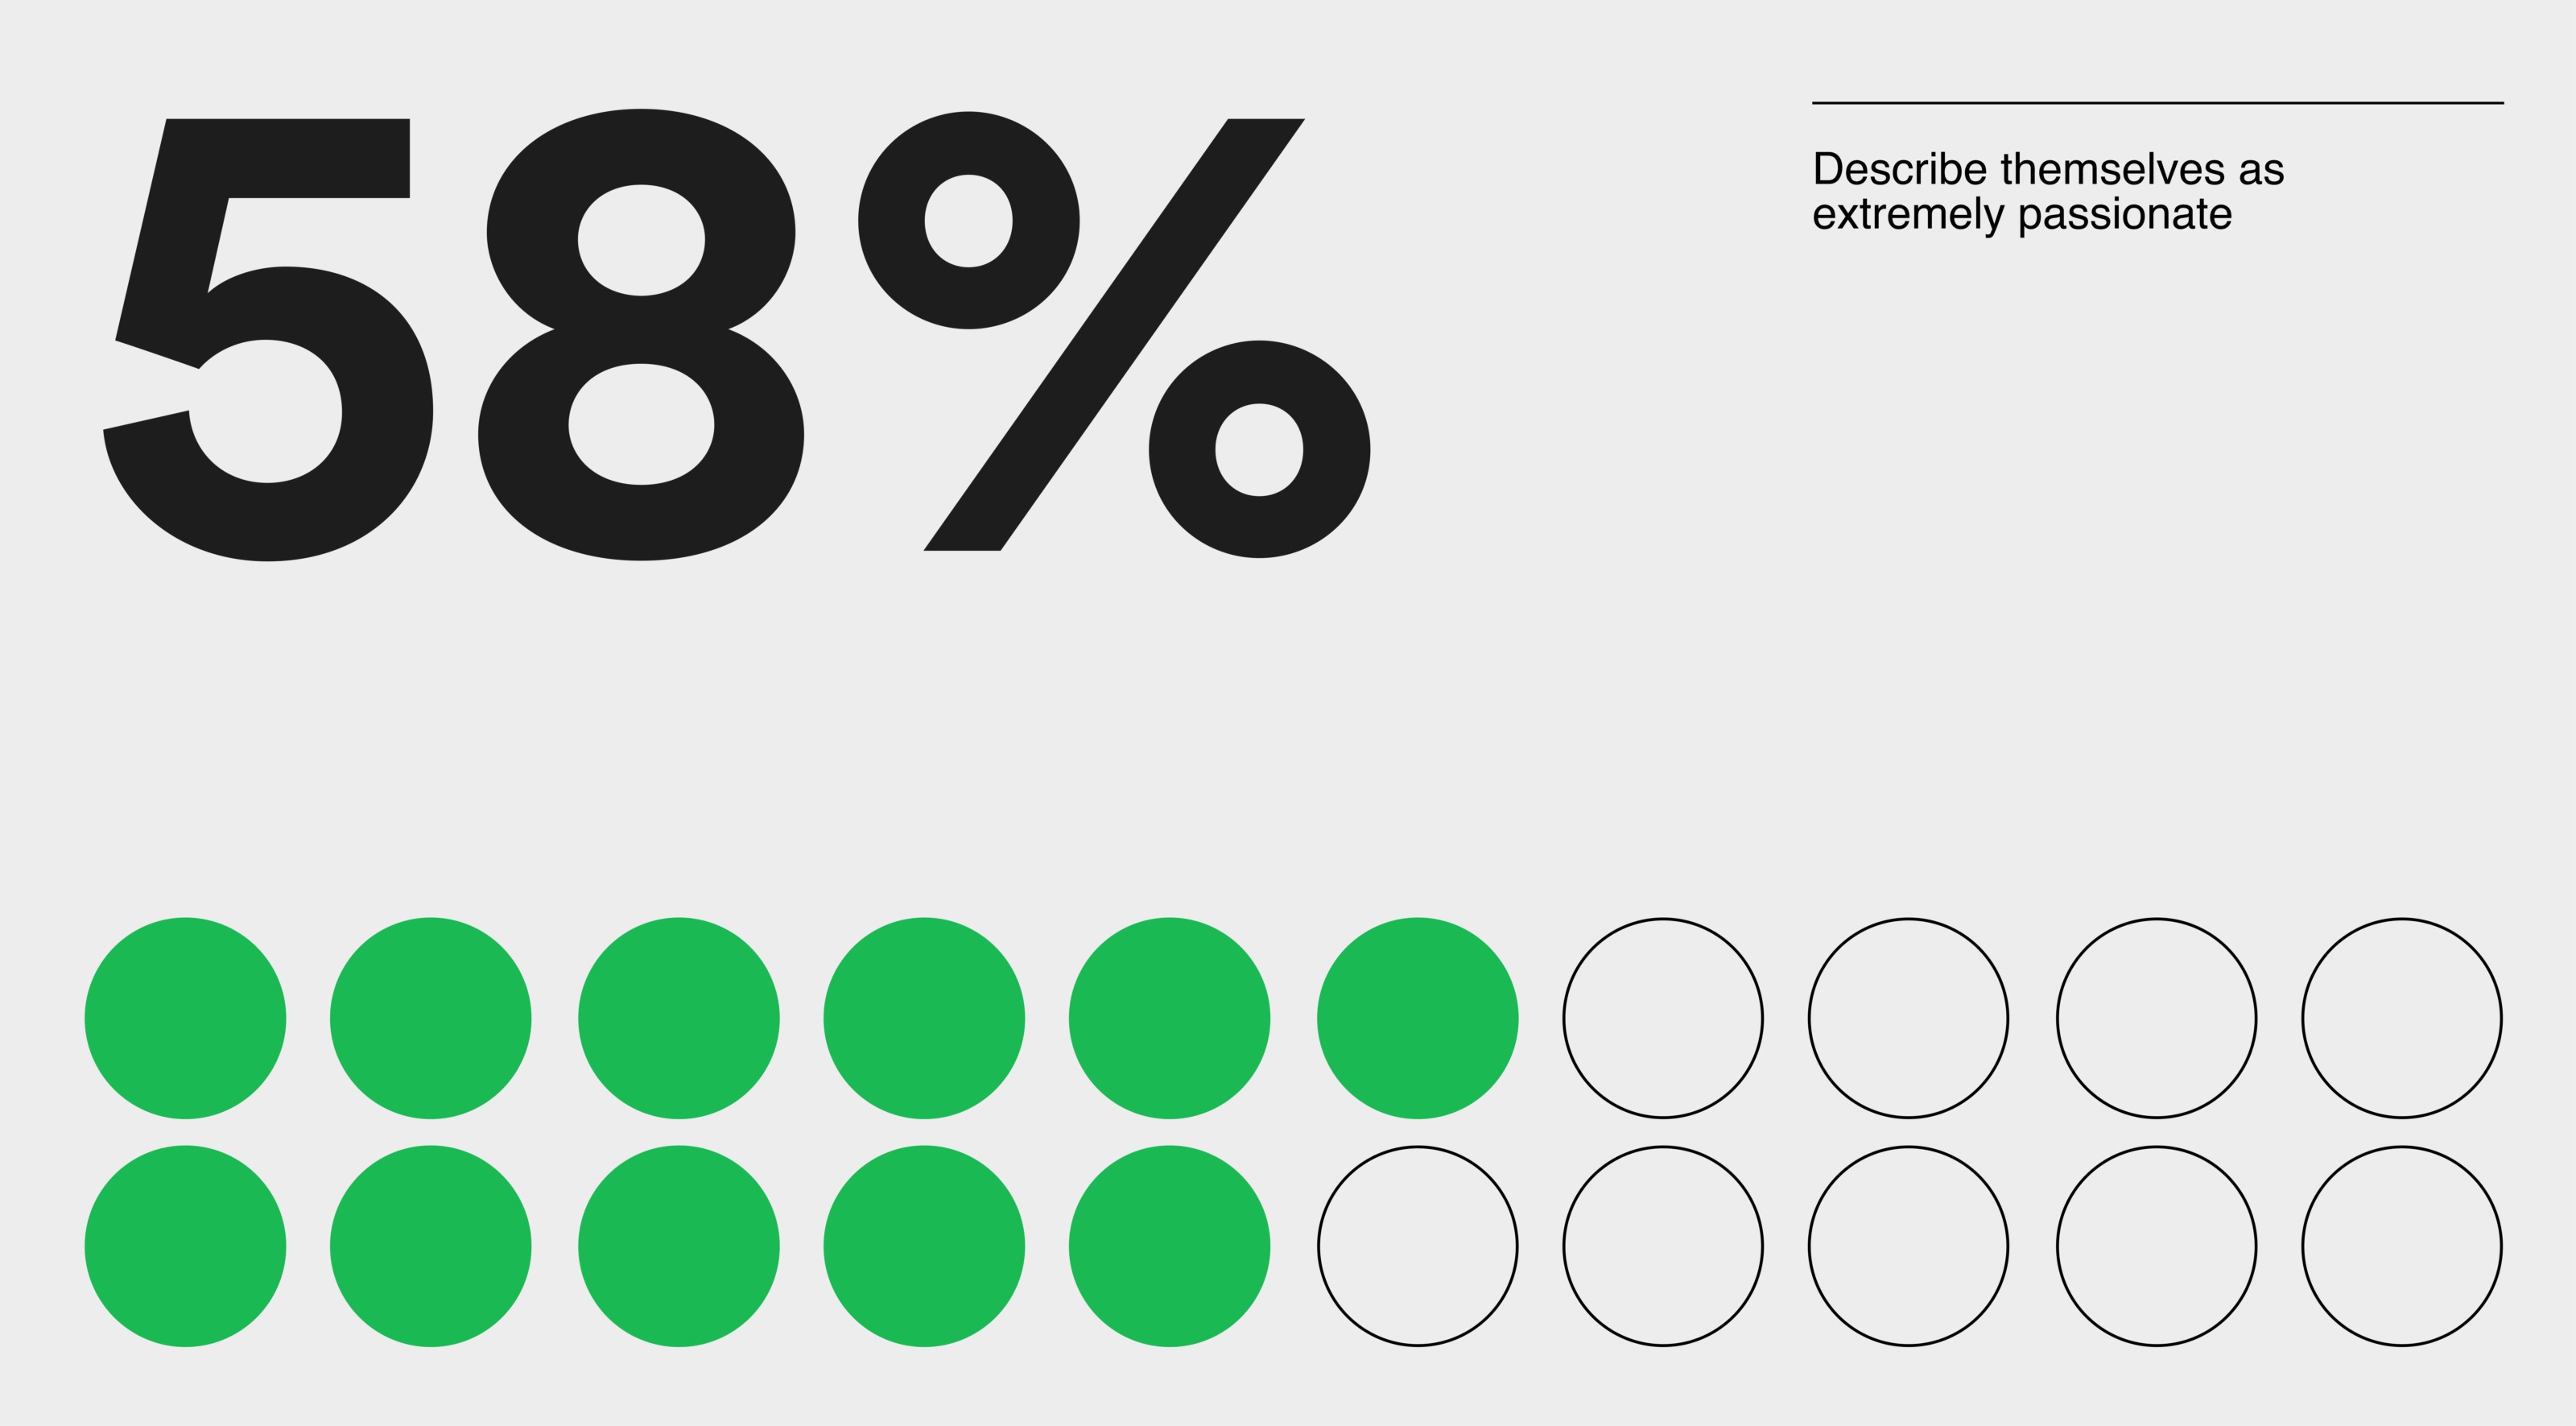 Infographic: “58% describe themselves as extremely passionate”